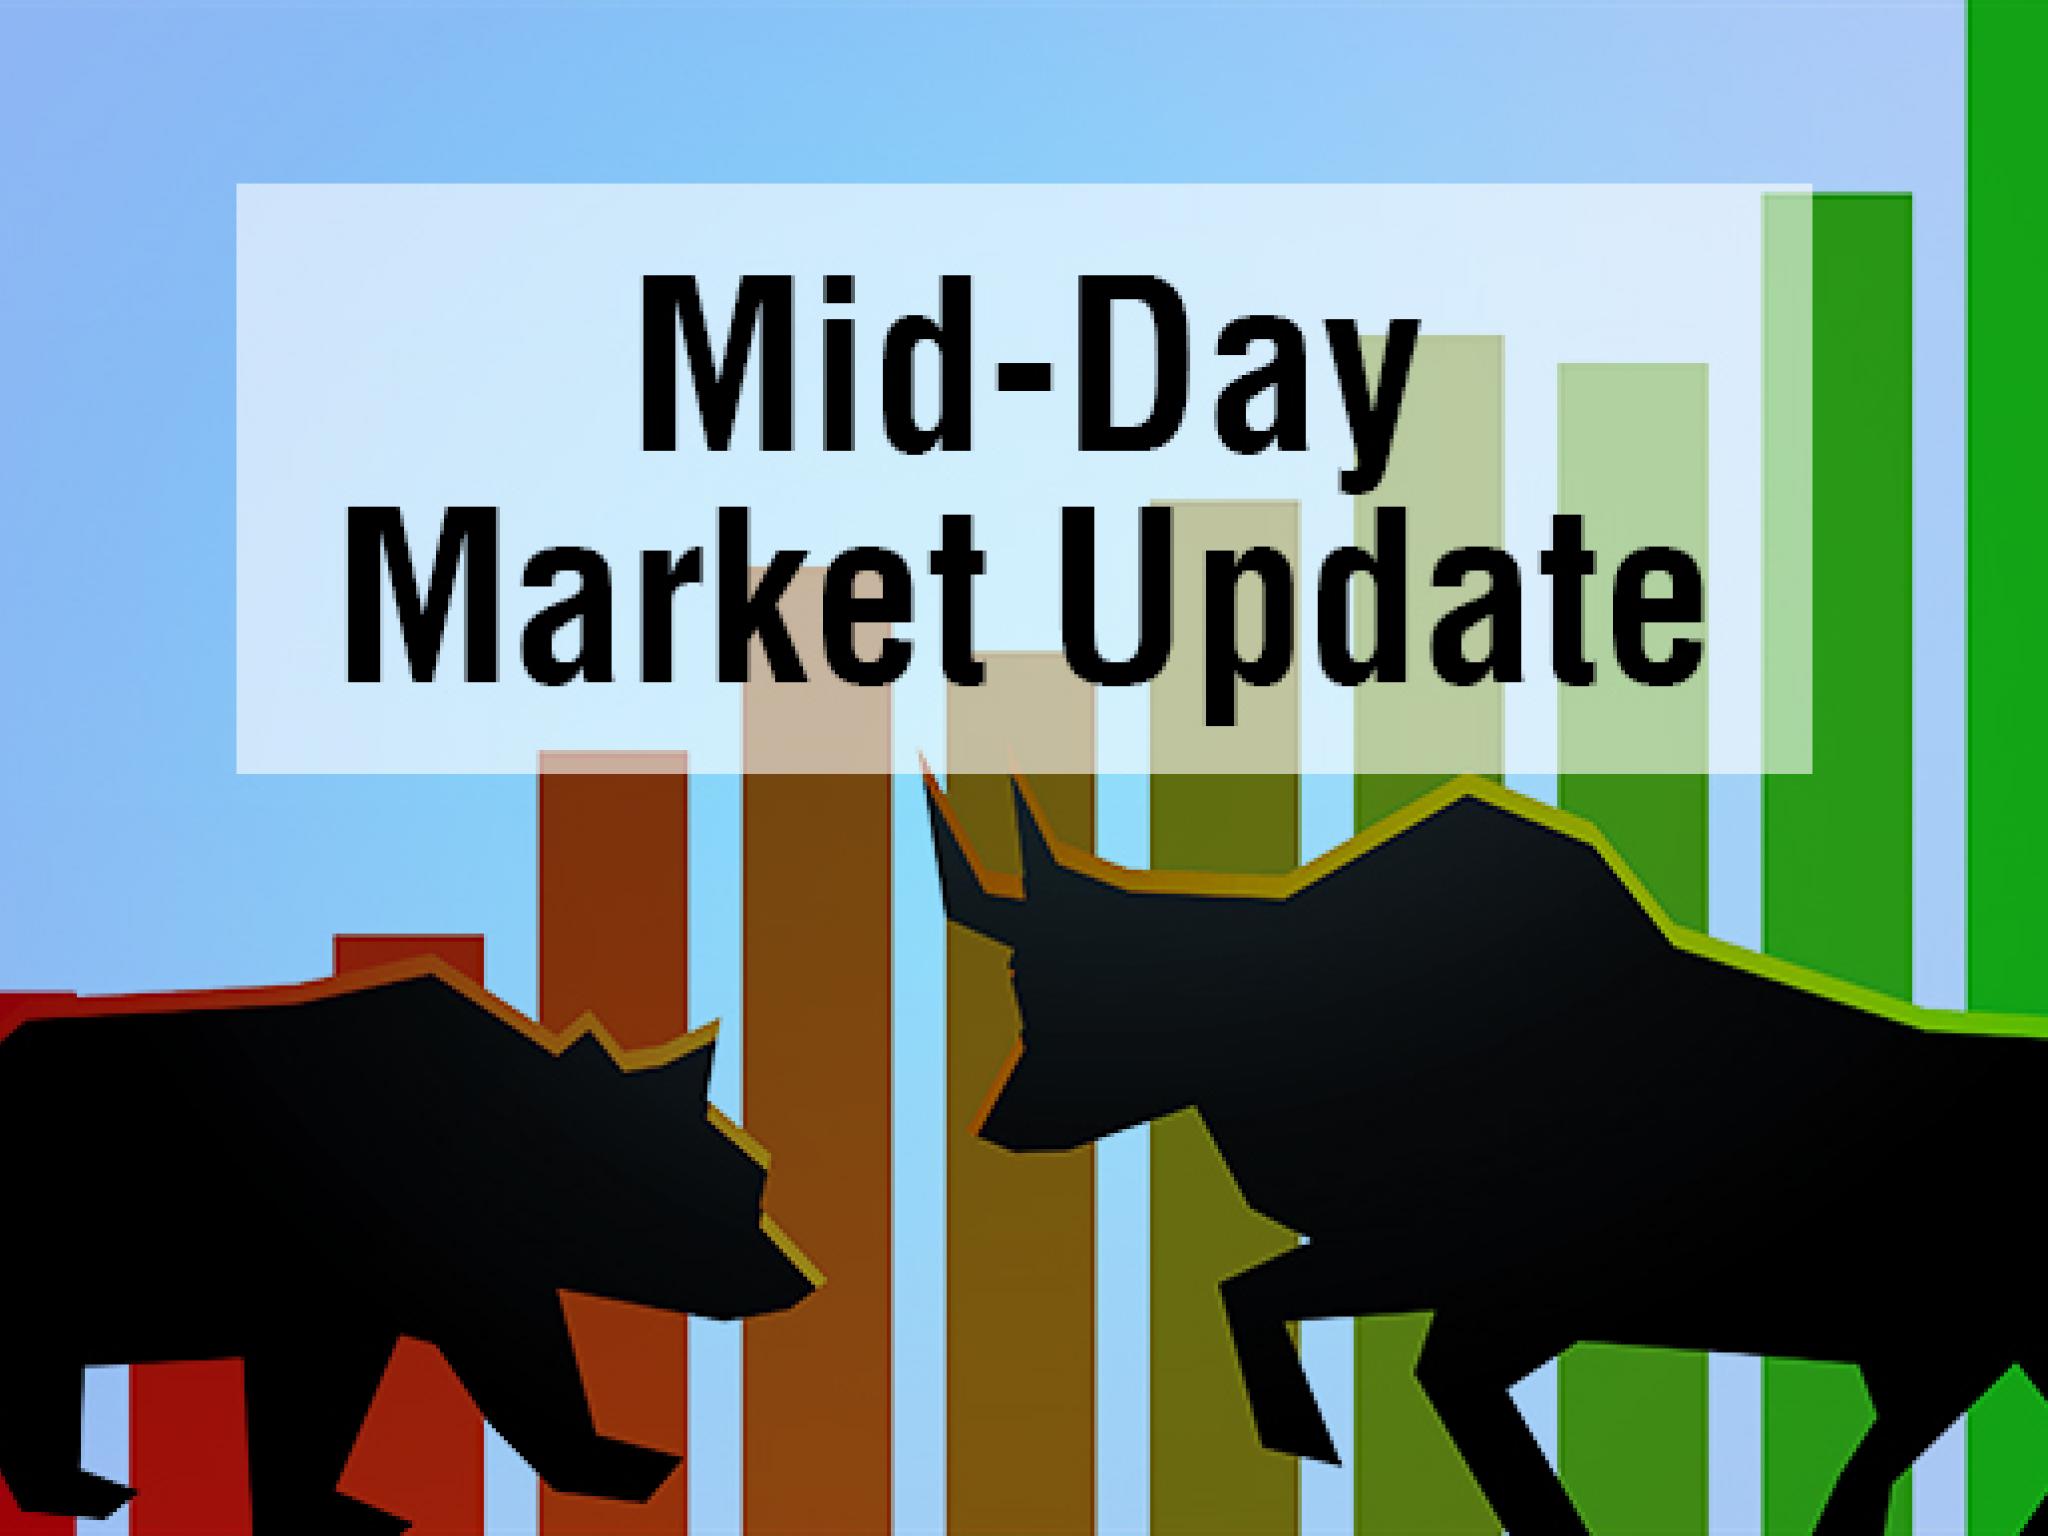  mid-day-market-update-dow-drops-over-100-points-amn-healthcare-services-shares-climb-following-strong-q4-results 